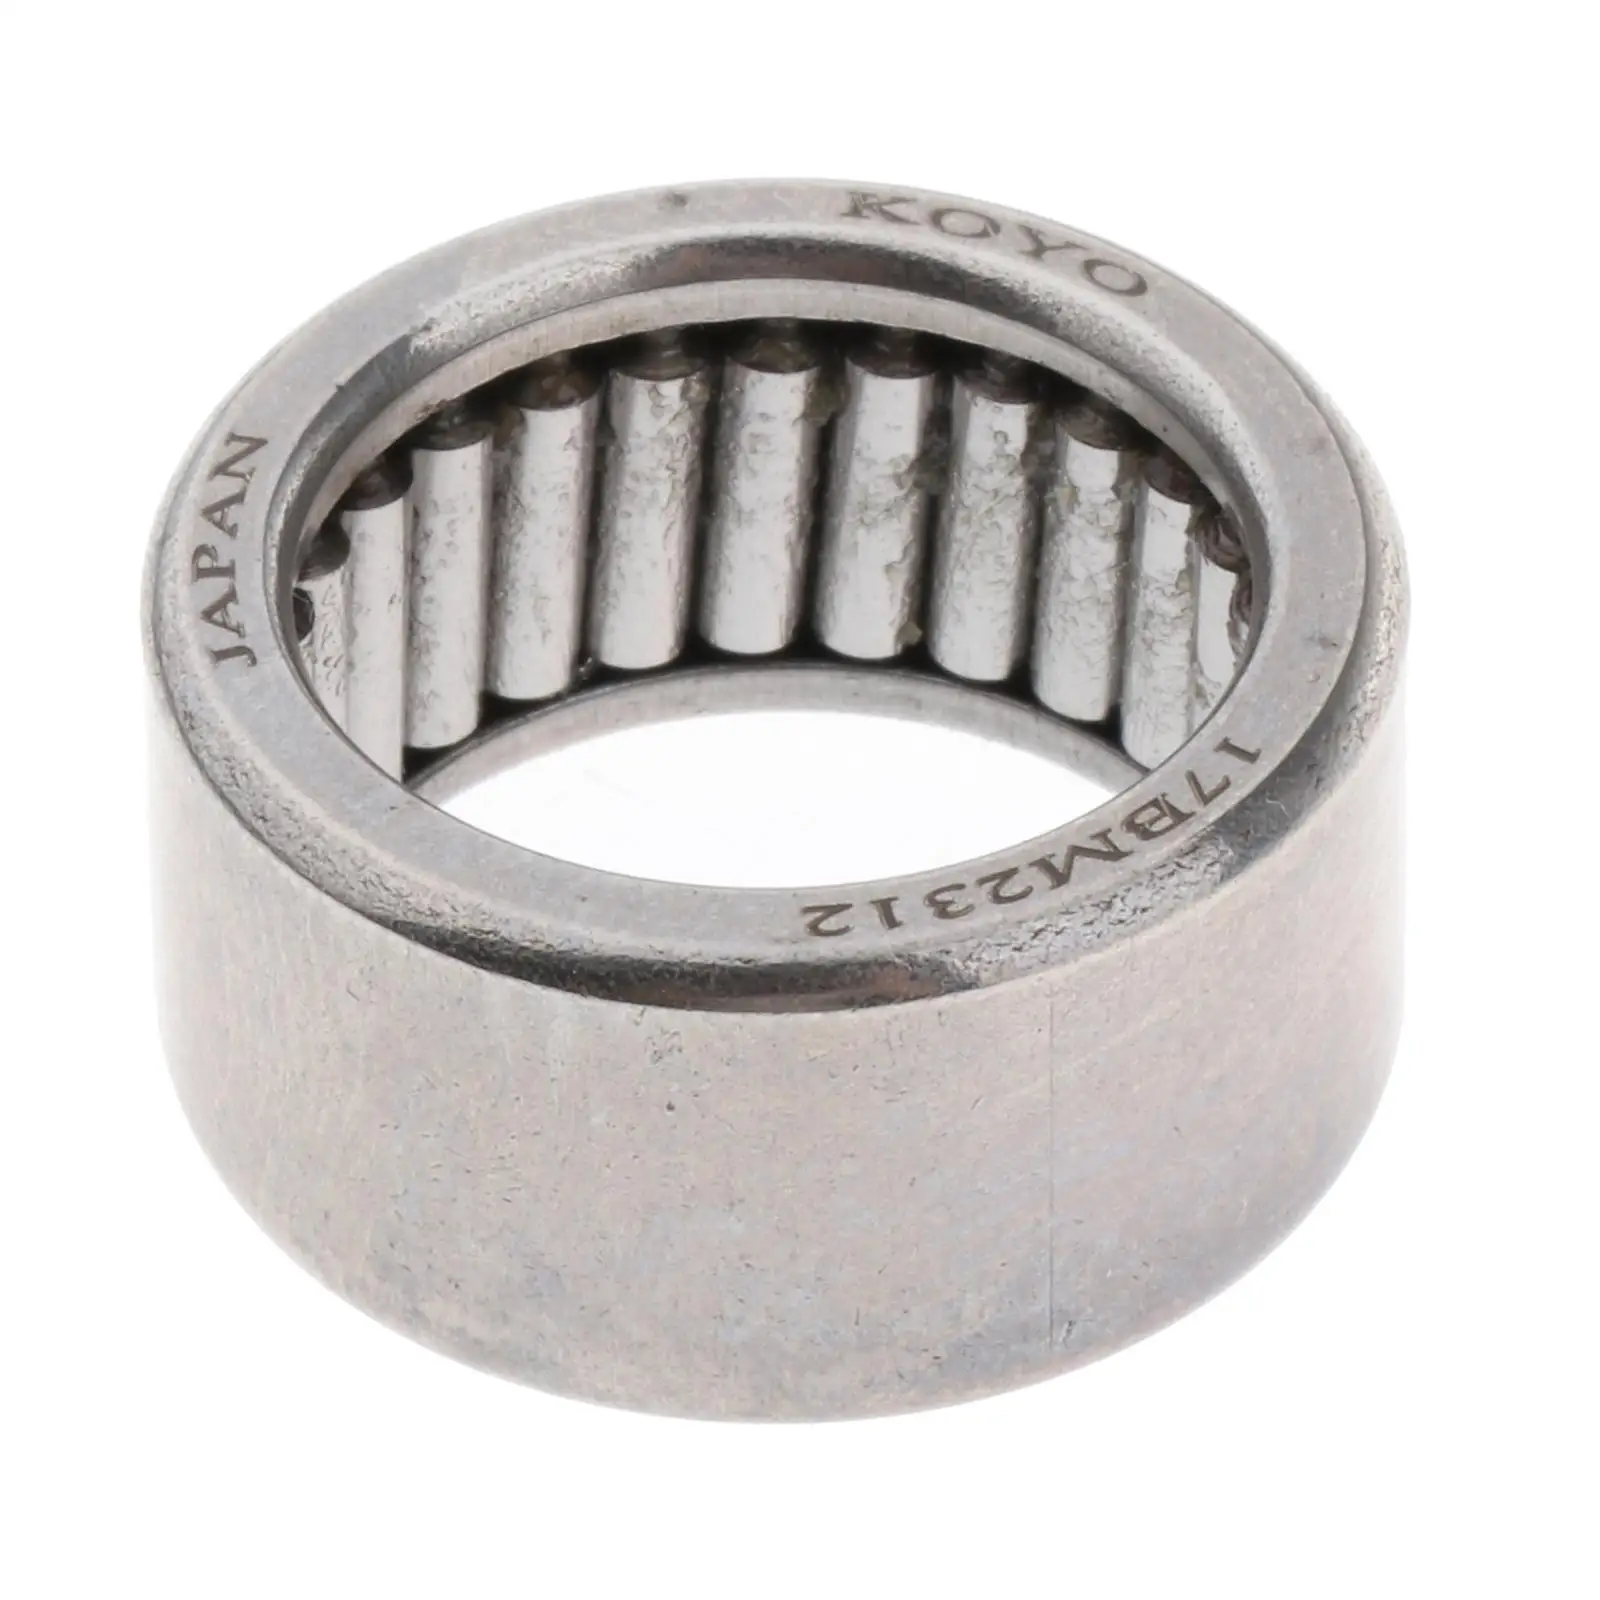 22mm Lower Casing  Bearing  NO.: 93315-317 Easy and Convenient to Install and Use